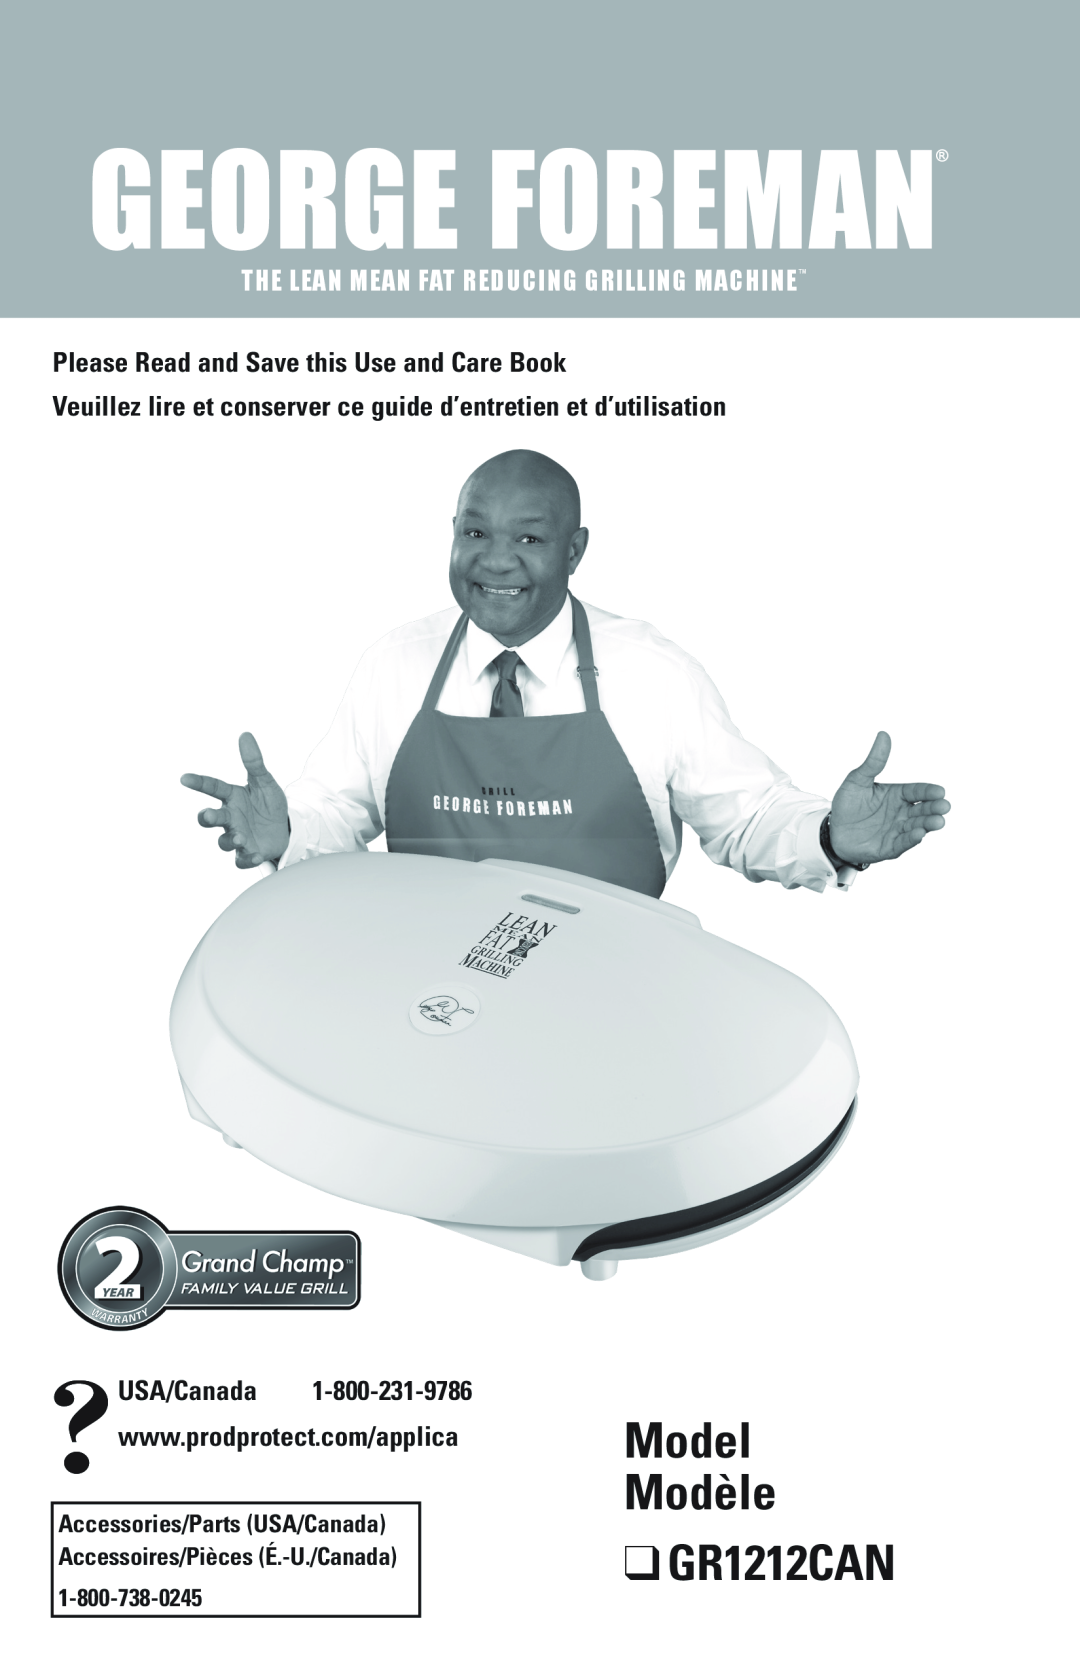 George Foreman manual Model Modèle GR1212CAN, The Lean Mean Fat Reducing Grilling Machinetm 